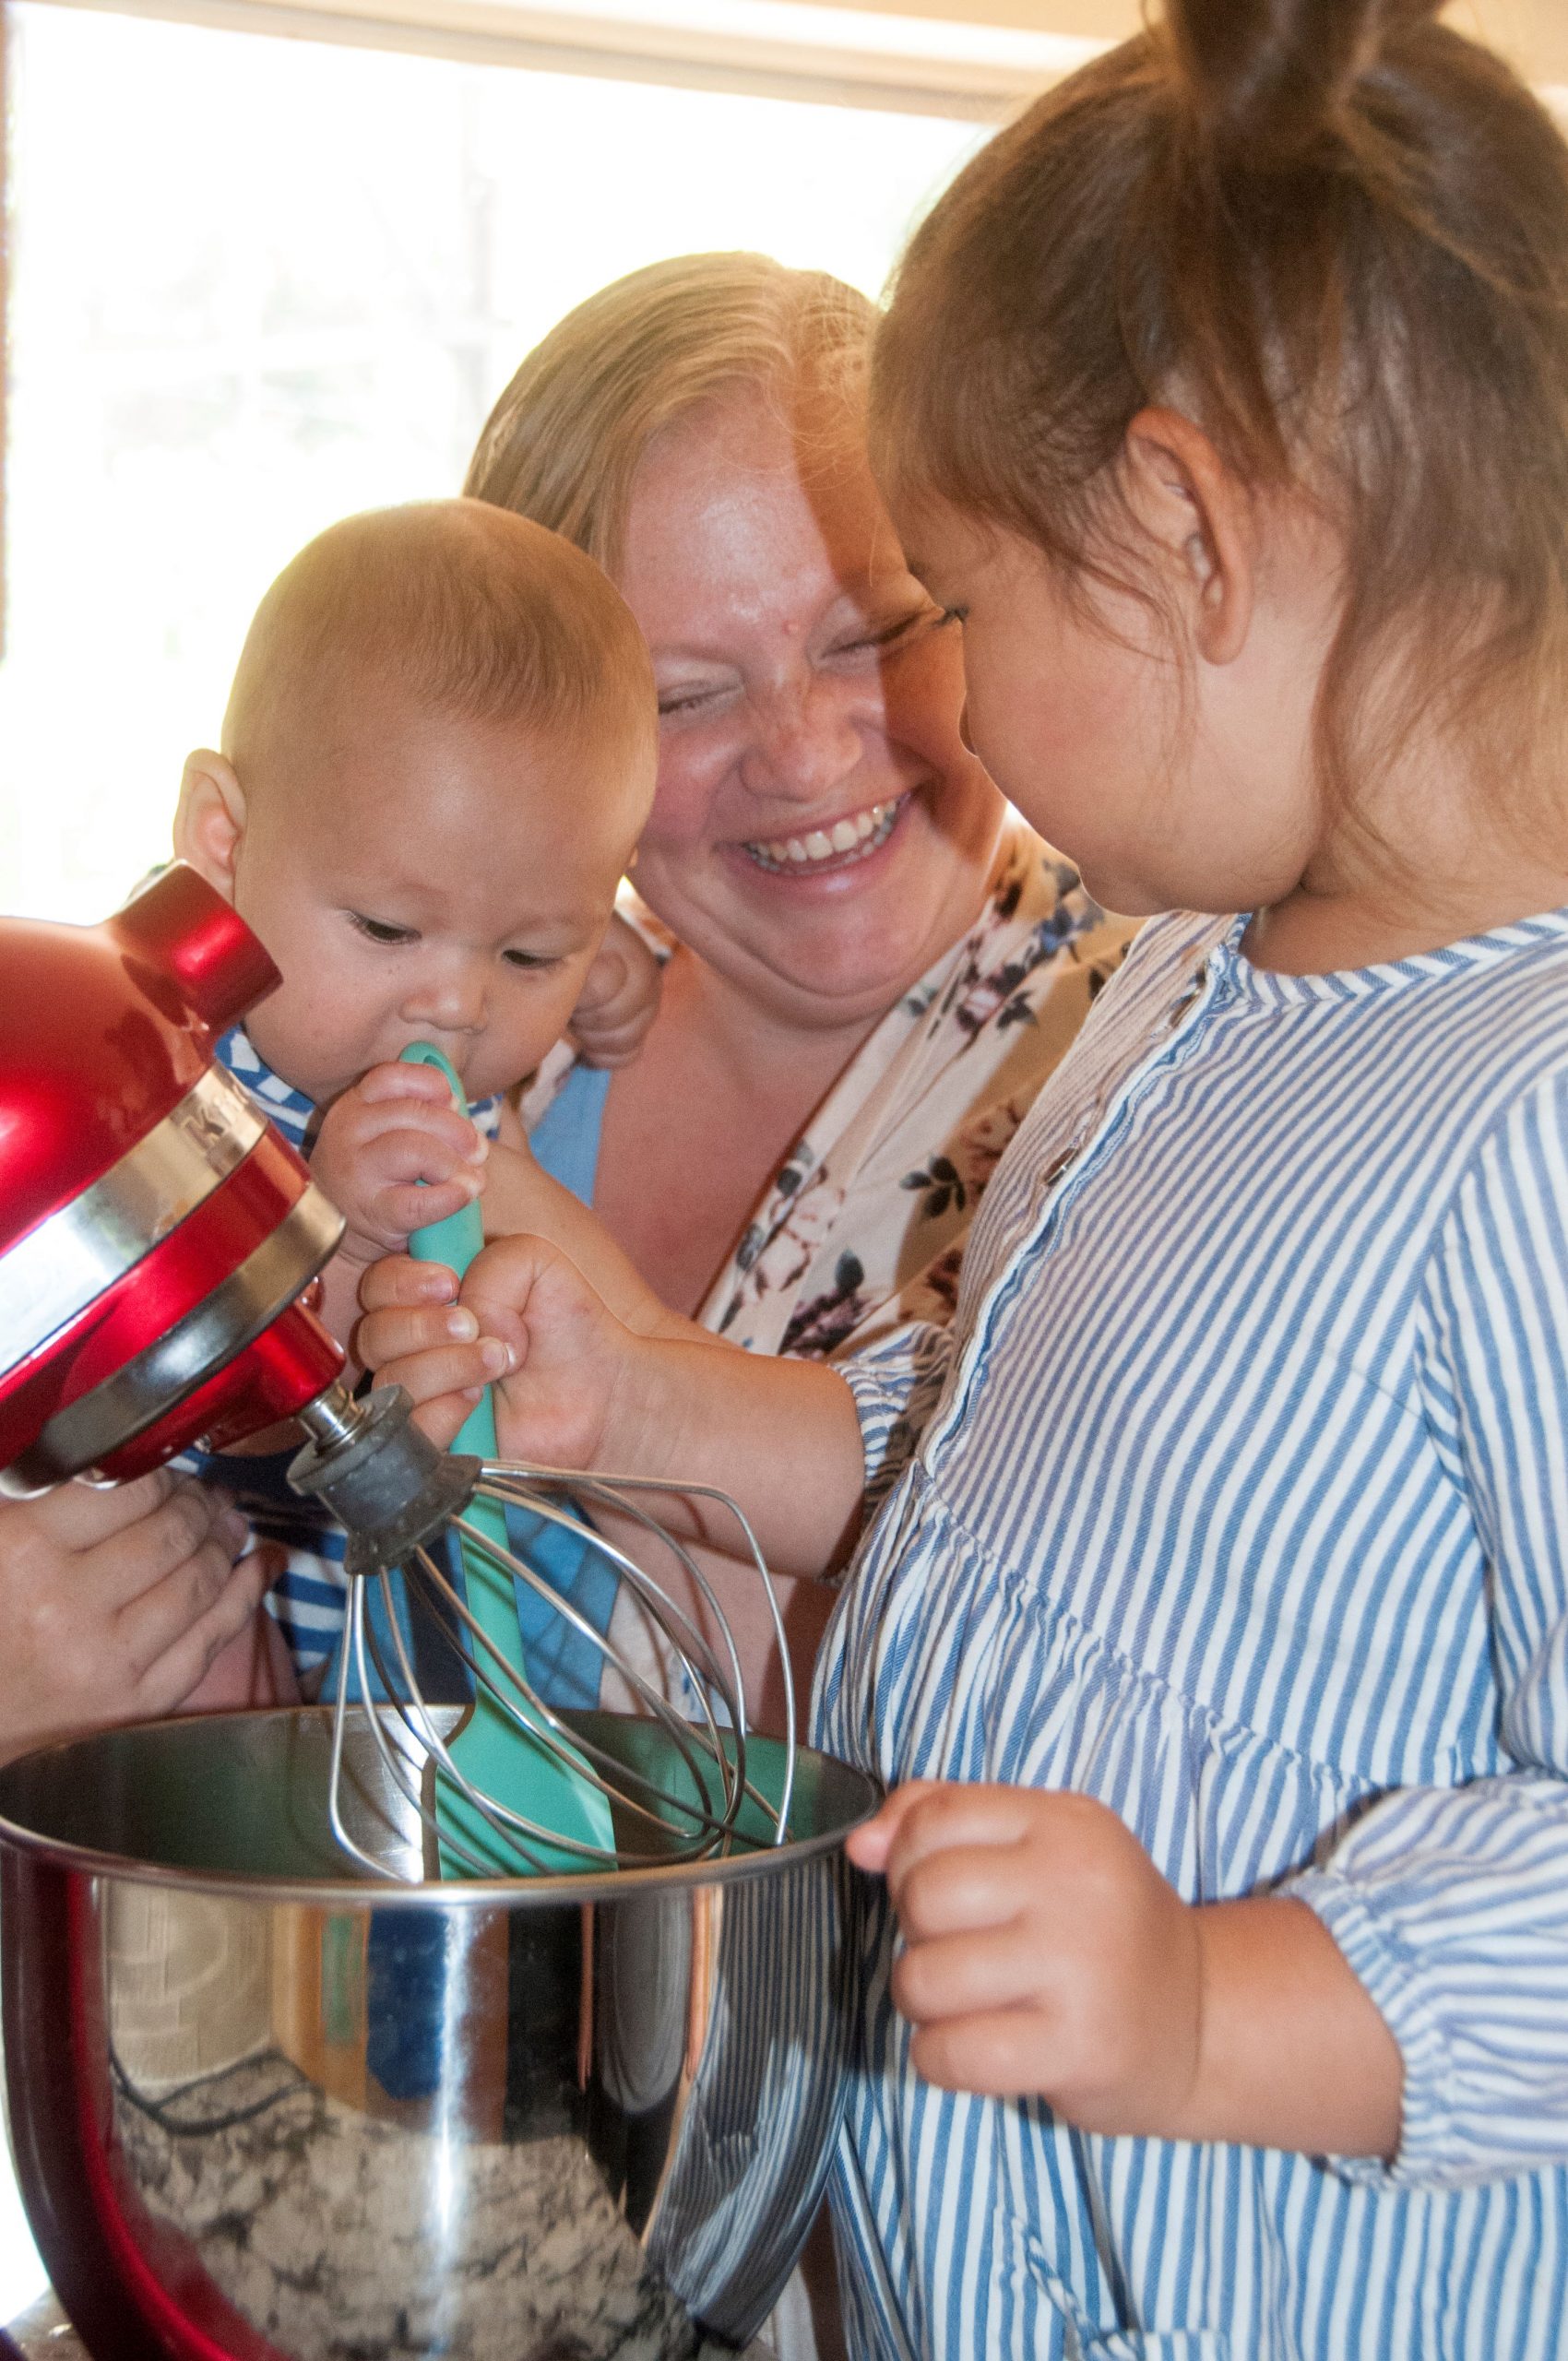 Ally Adair Chung homeschooling with her daughter and baby in the kitchen baking with a stand mixer.